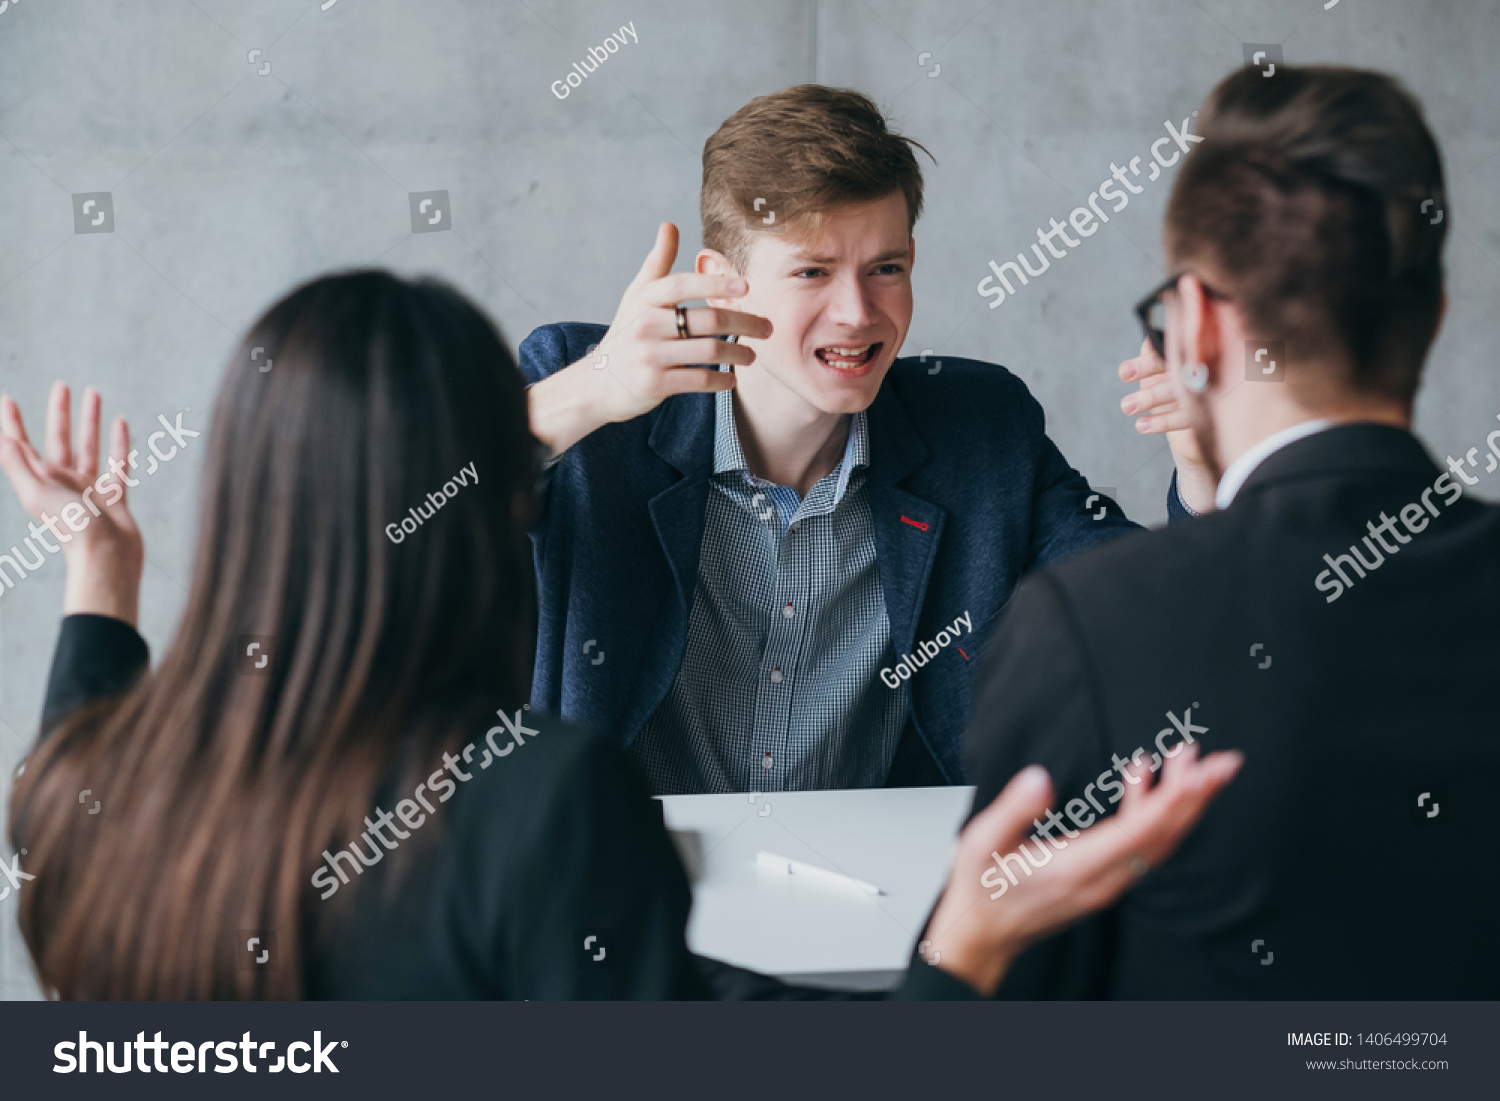 Stock Photo Failed Job Interview Human Resources Short Tempered Applicant Yelling At Hr Managers Pressing 1406499704 